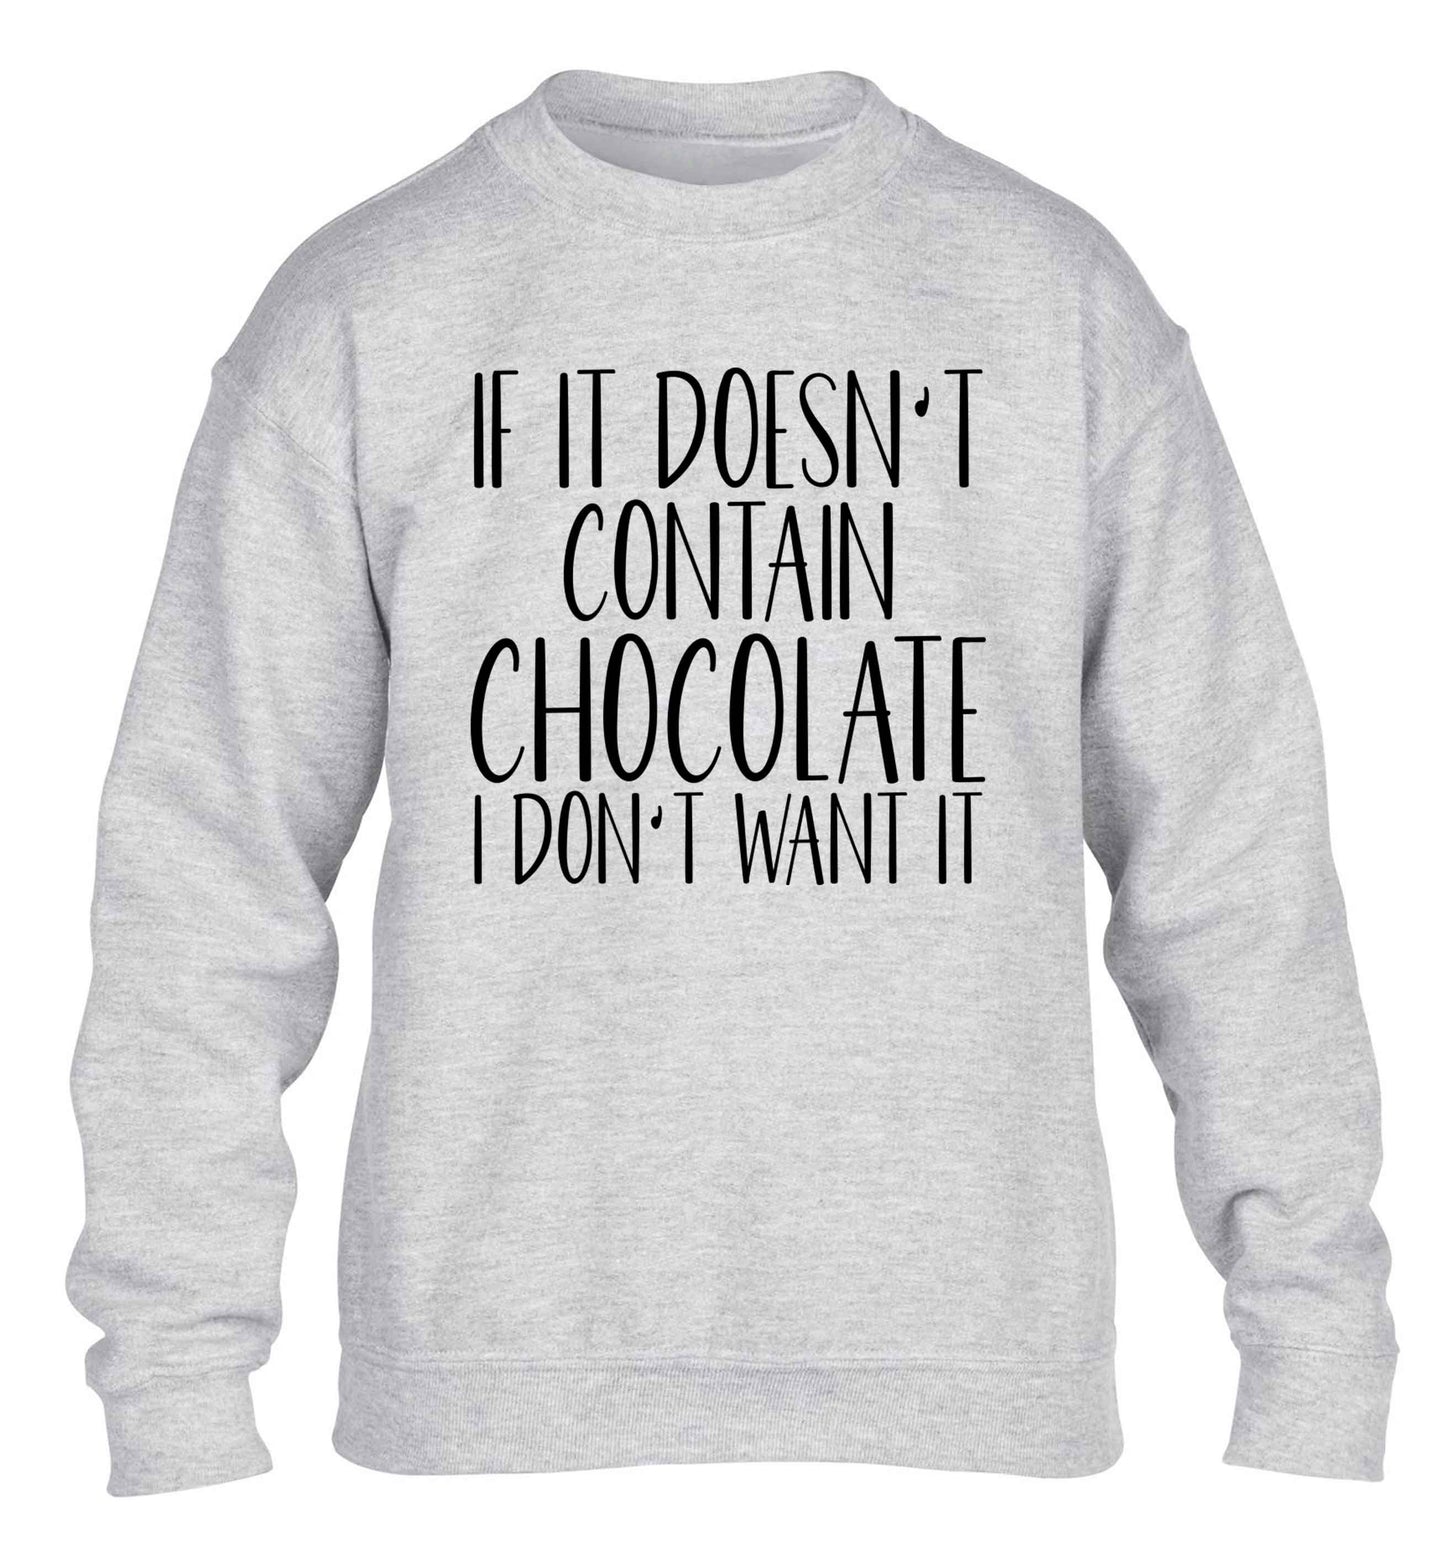 If it doesn't contain chocolate I don't want it children's grey sweater 12-13 Years